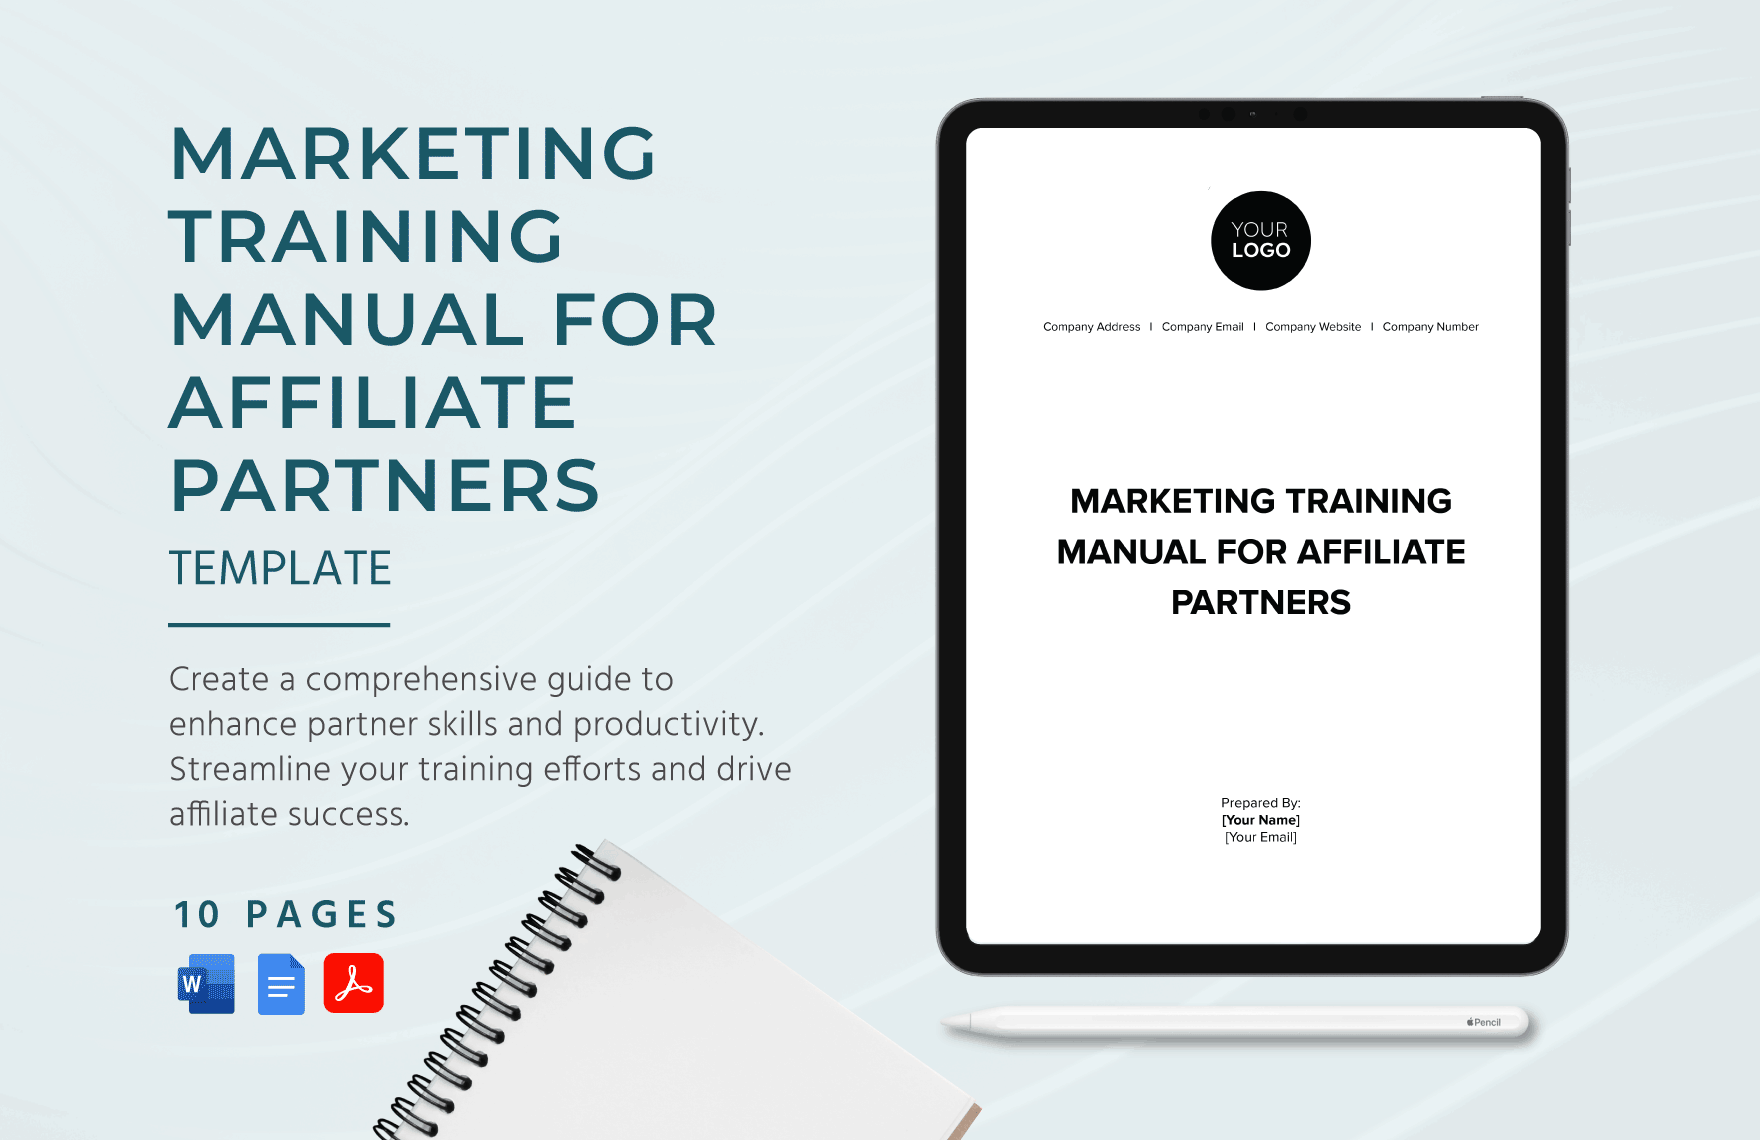 Marketing Training Manual for Affiliate Partners Template